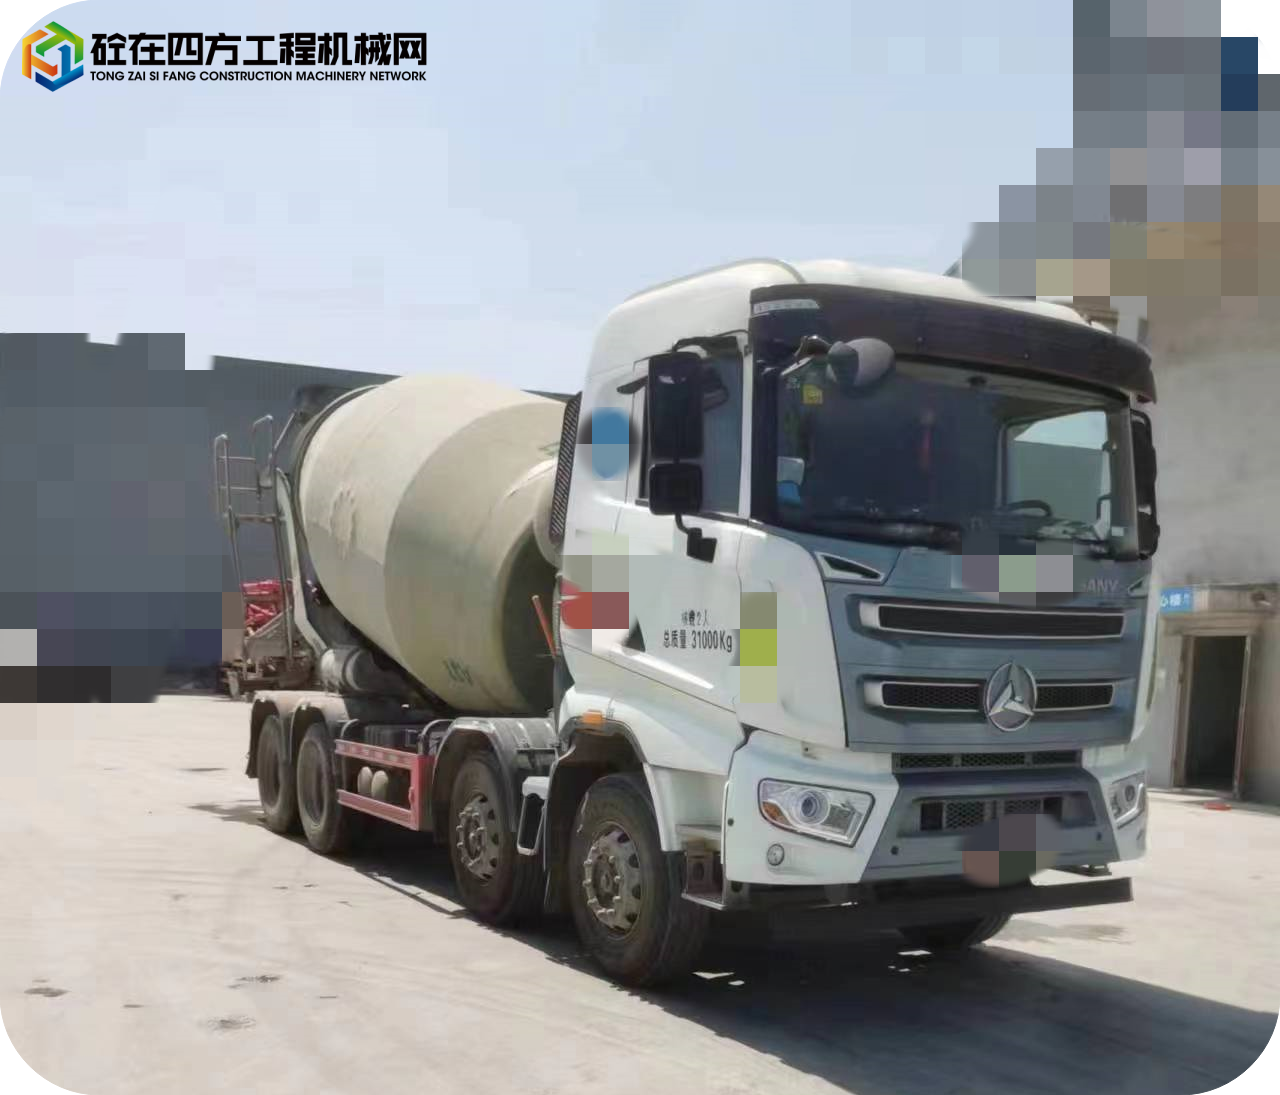 https://images.tongzsf.com/tong/truck_machine/20231021/1653382df9441a.png